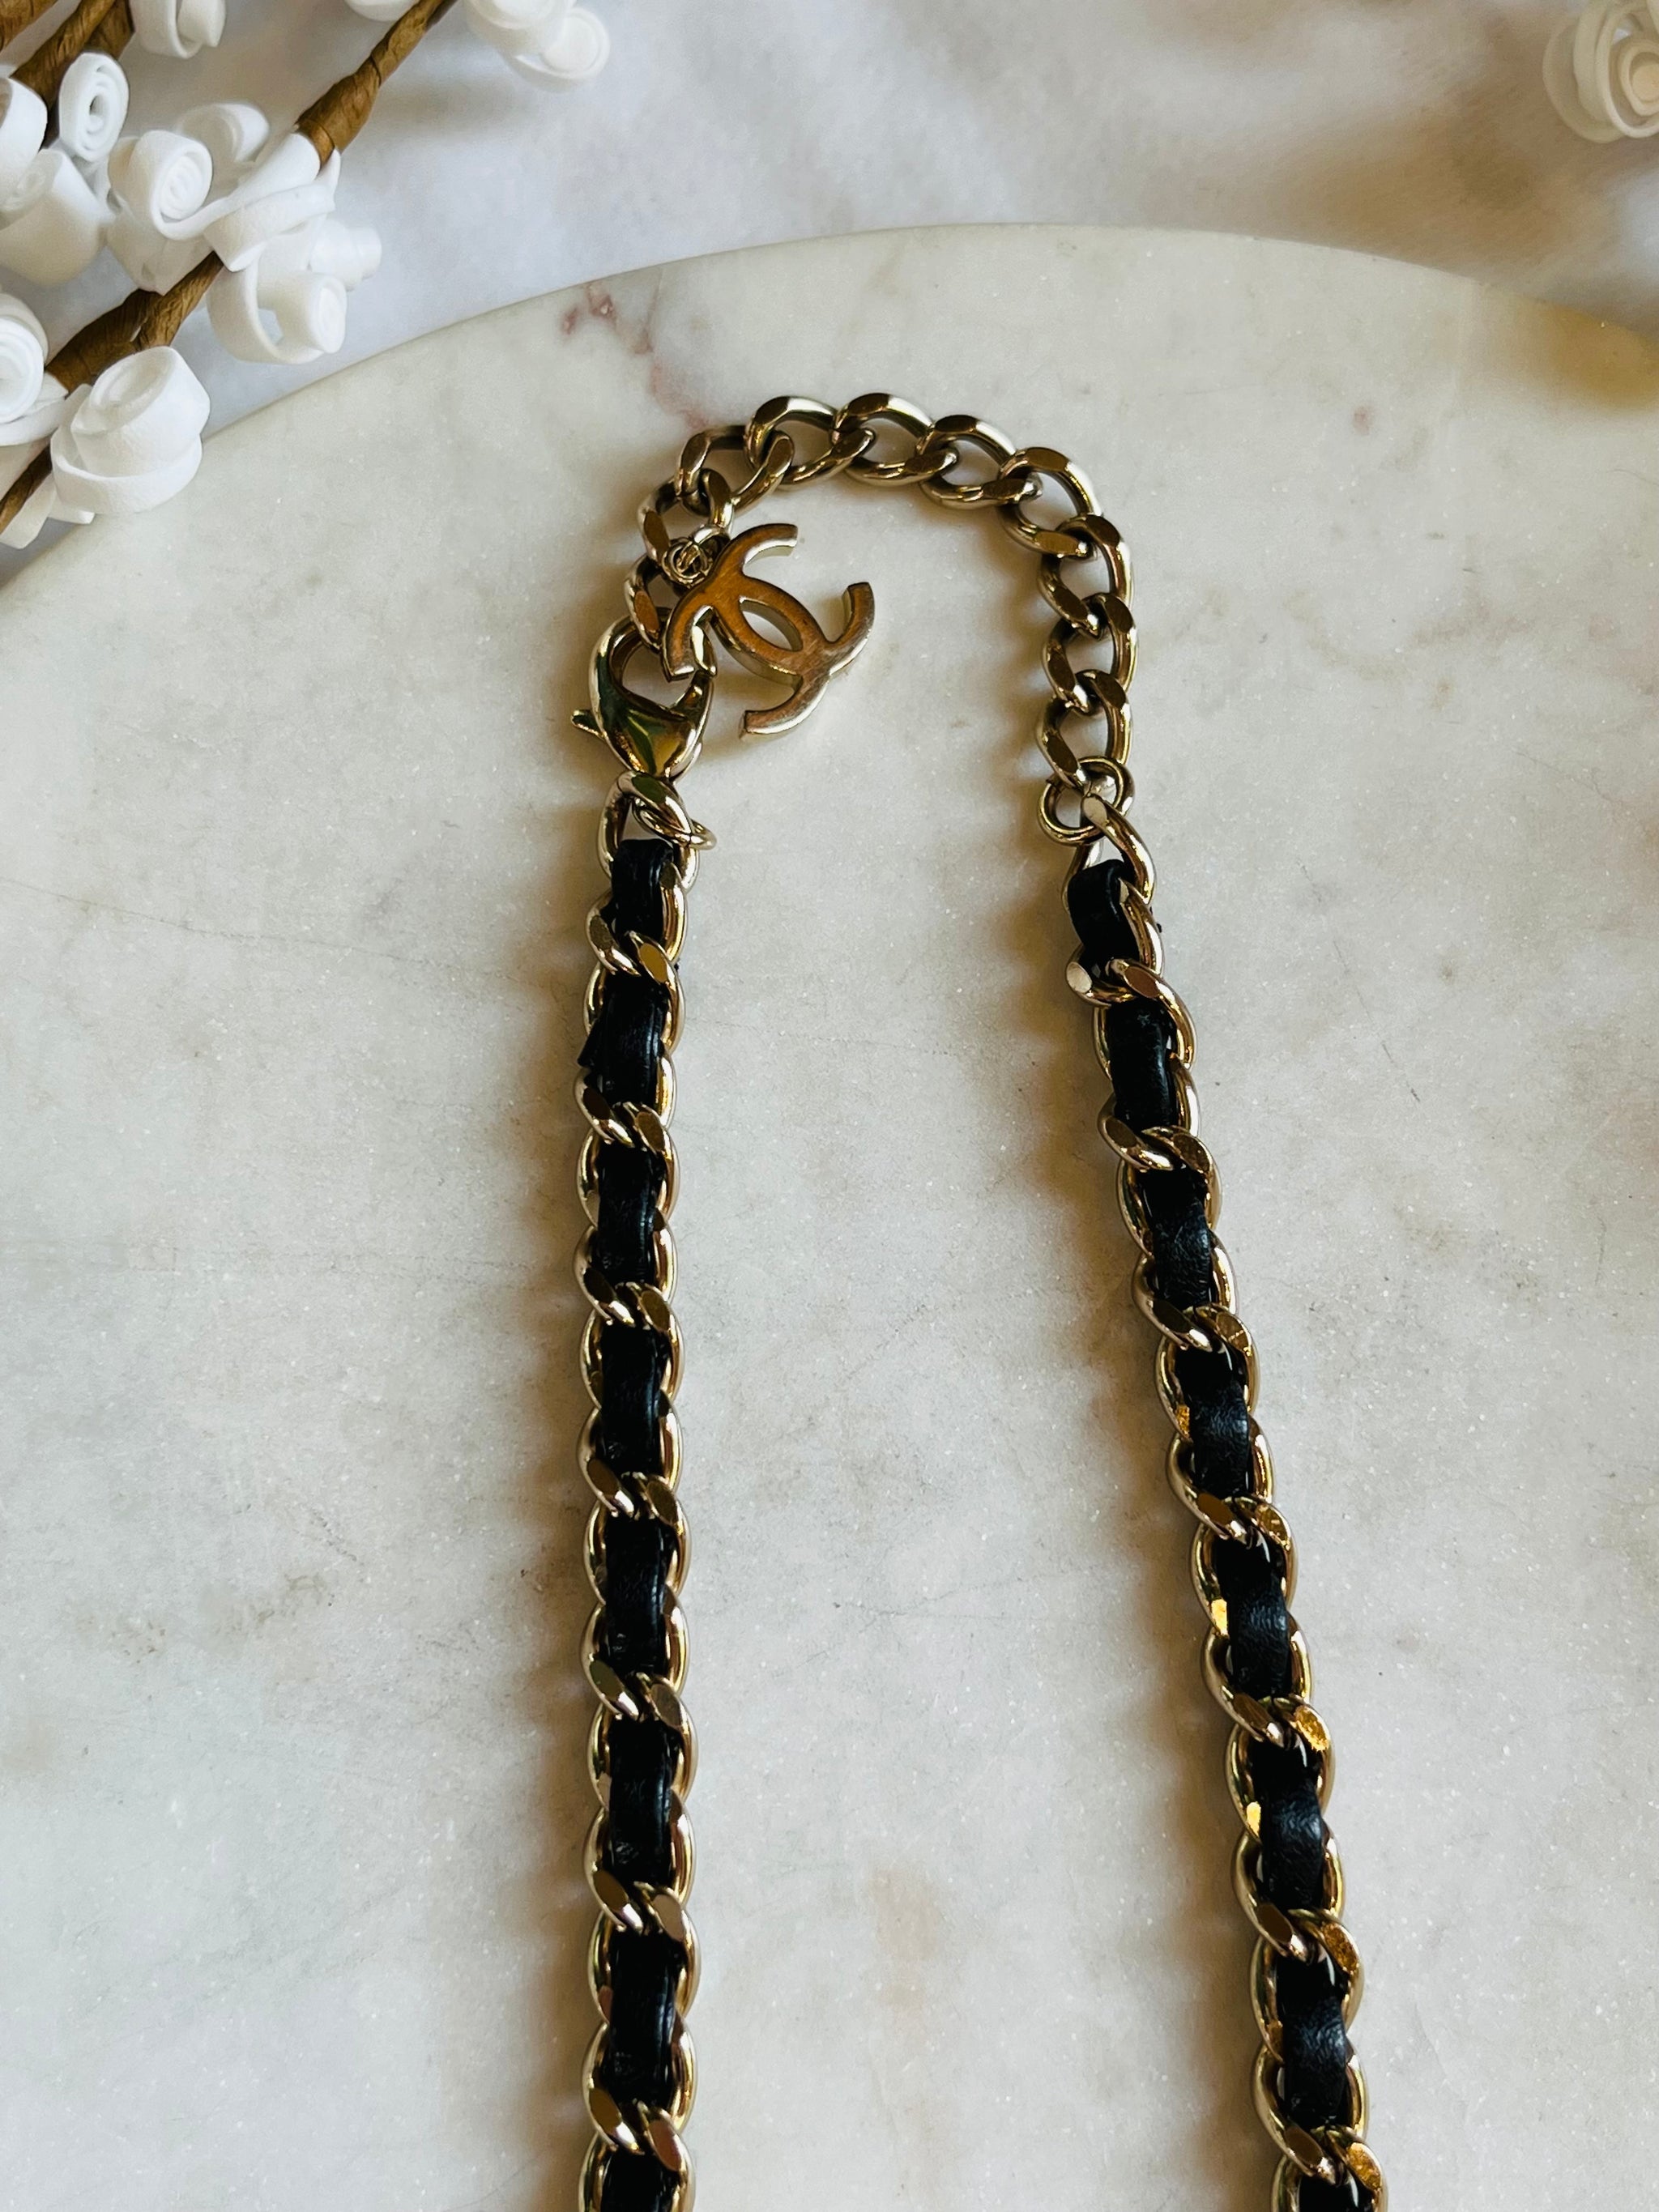 Vintage CHANEL gold chain belt with triple layer chains and two